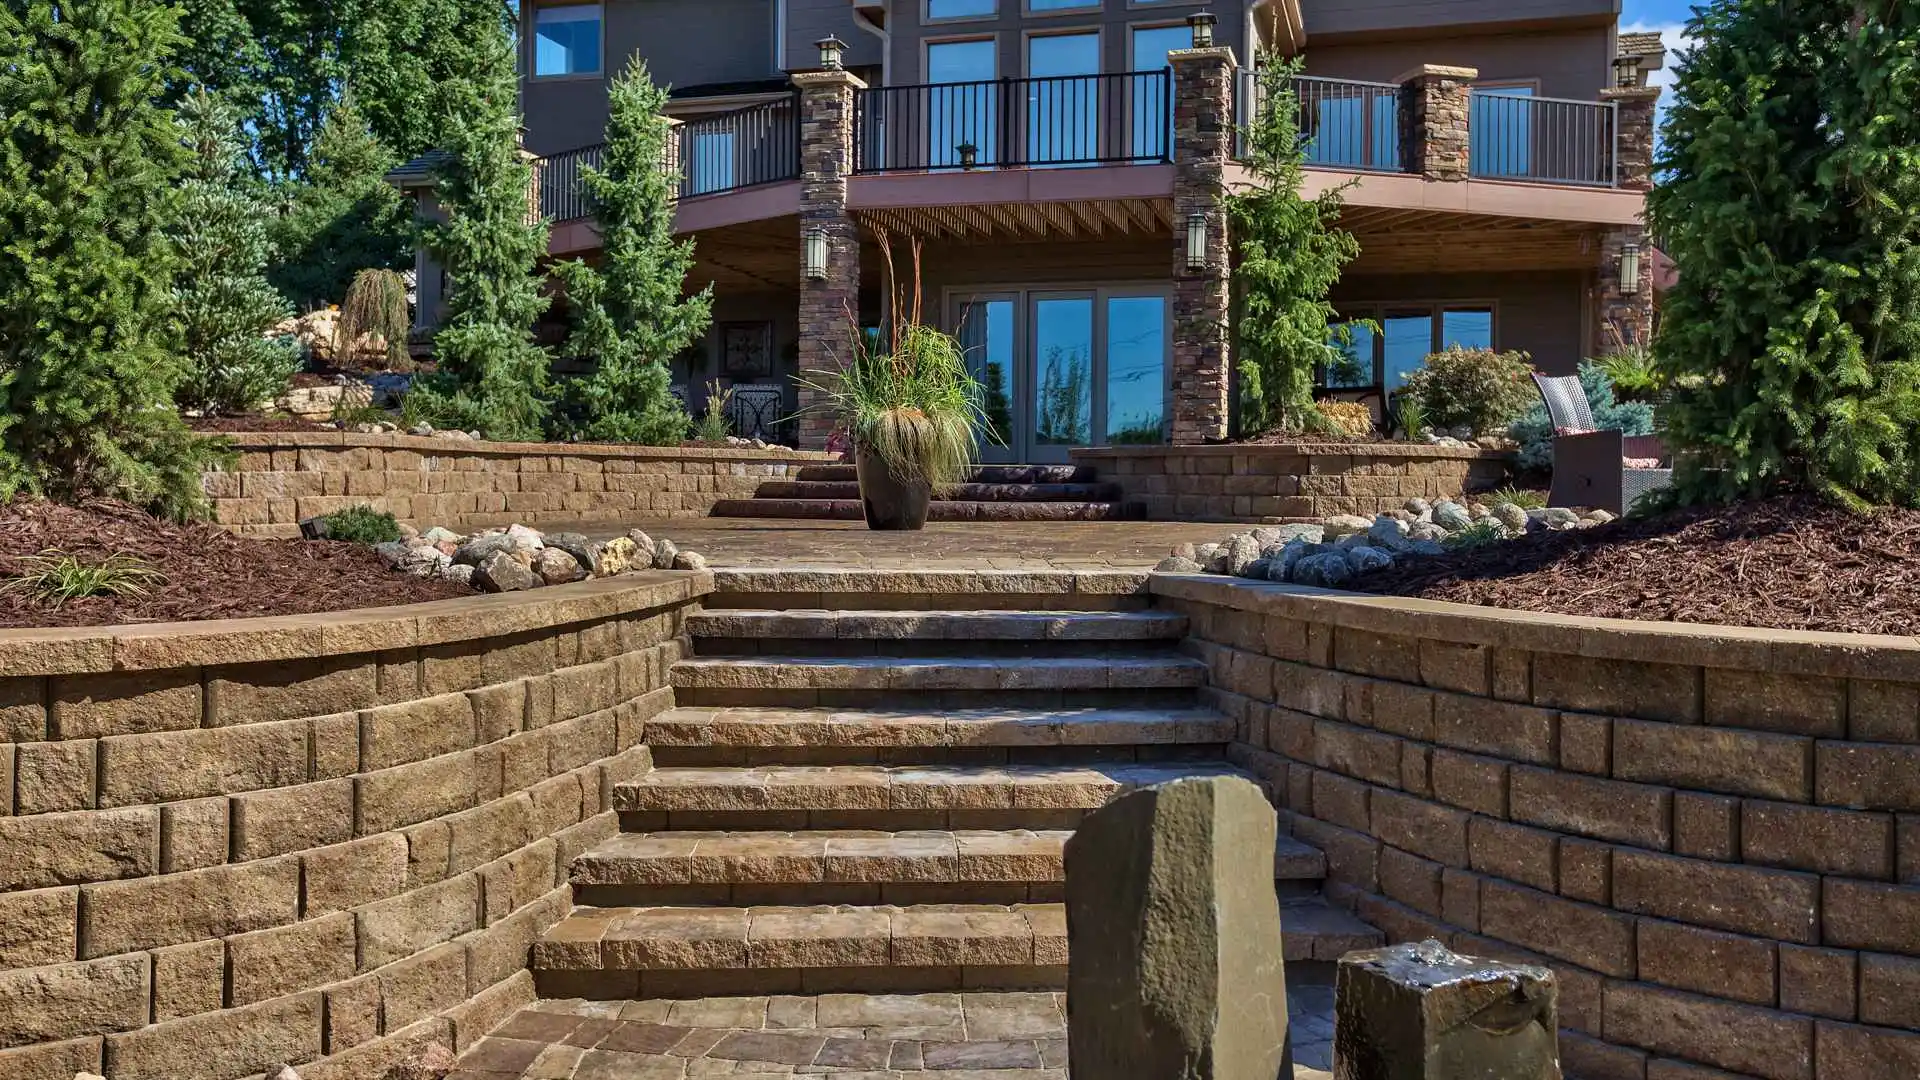 Is a Retaining Wall the Right Choice for Your Property?